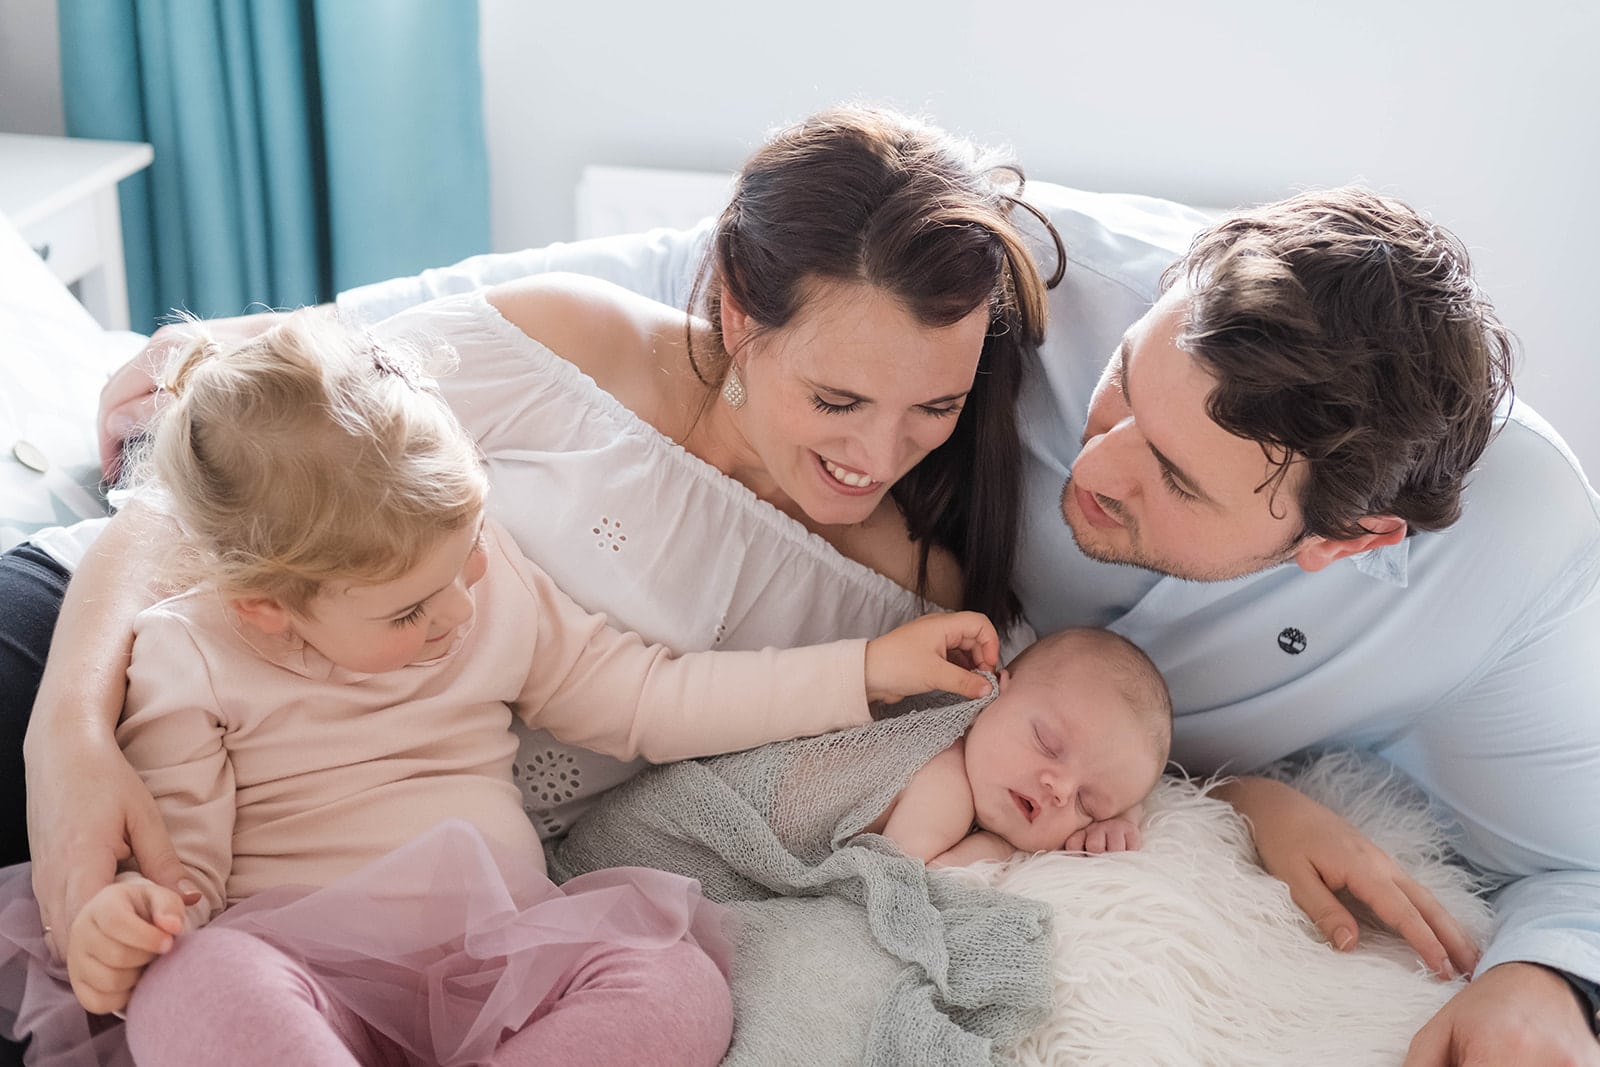 Family with a newborn baby cuddling on the bed